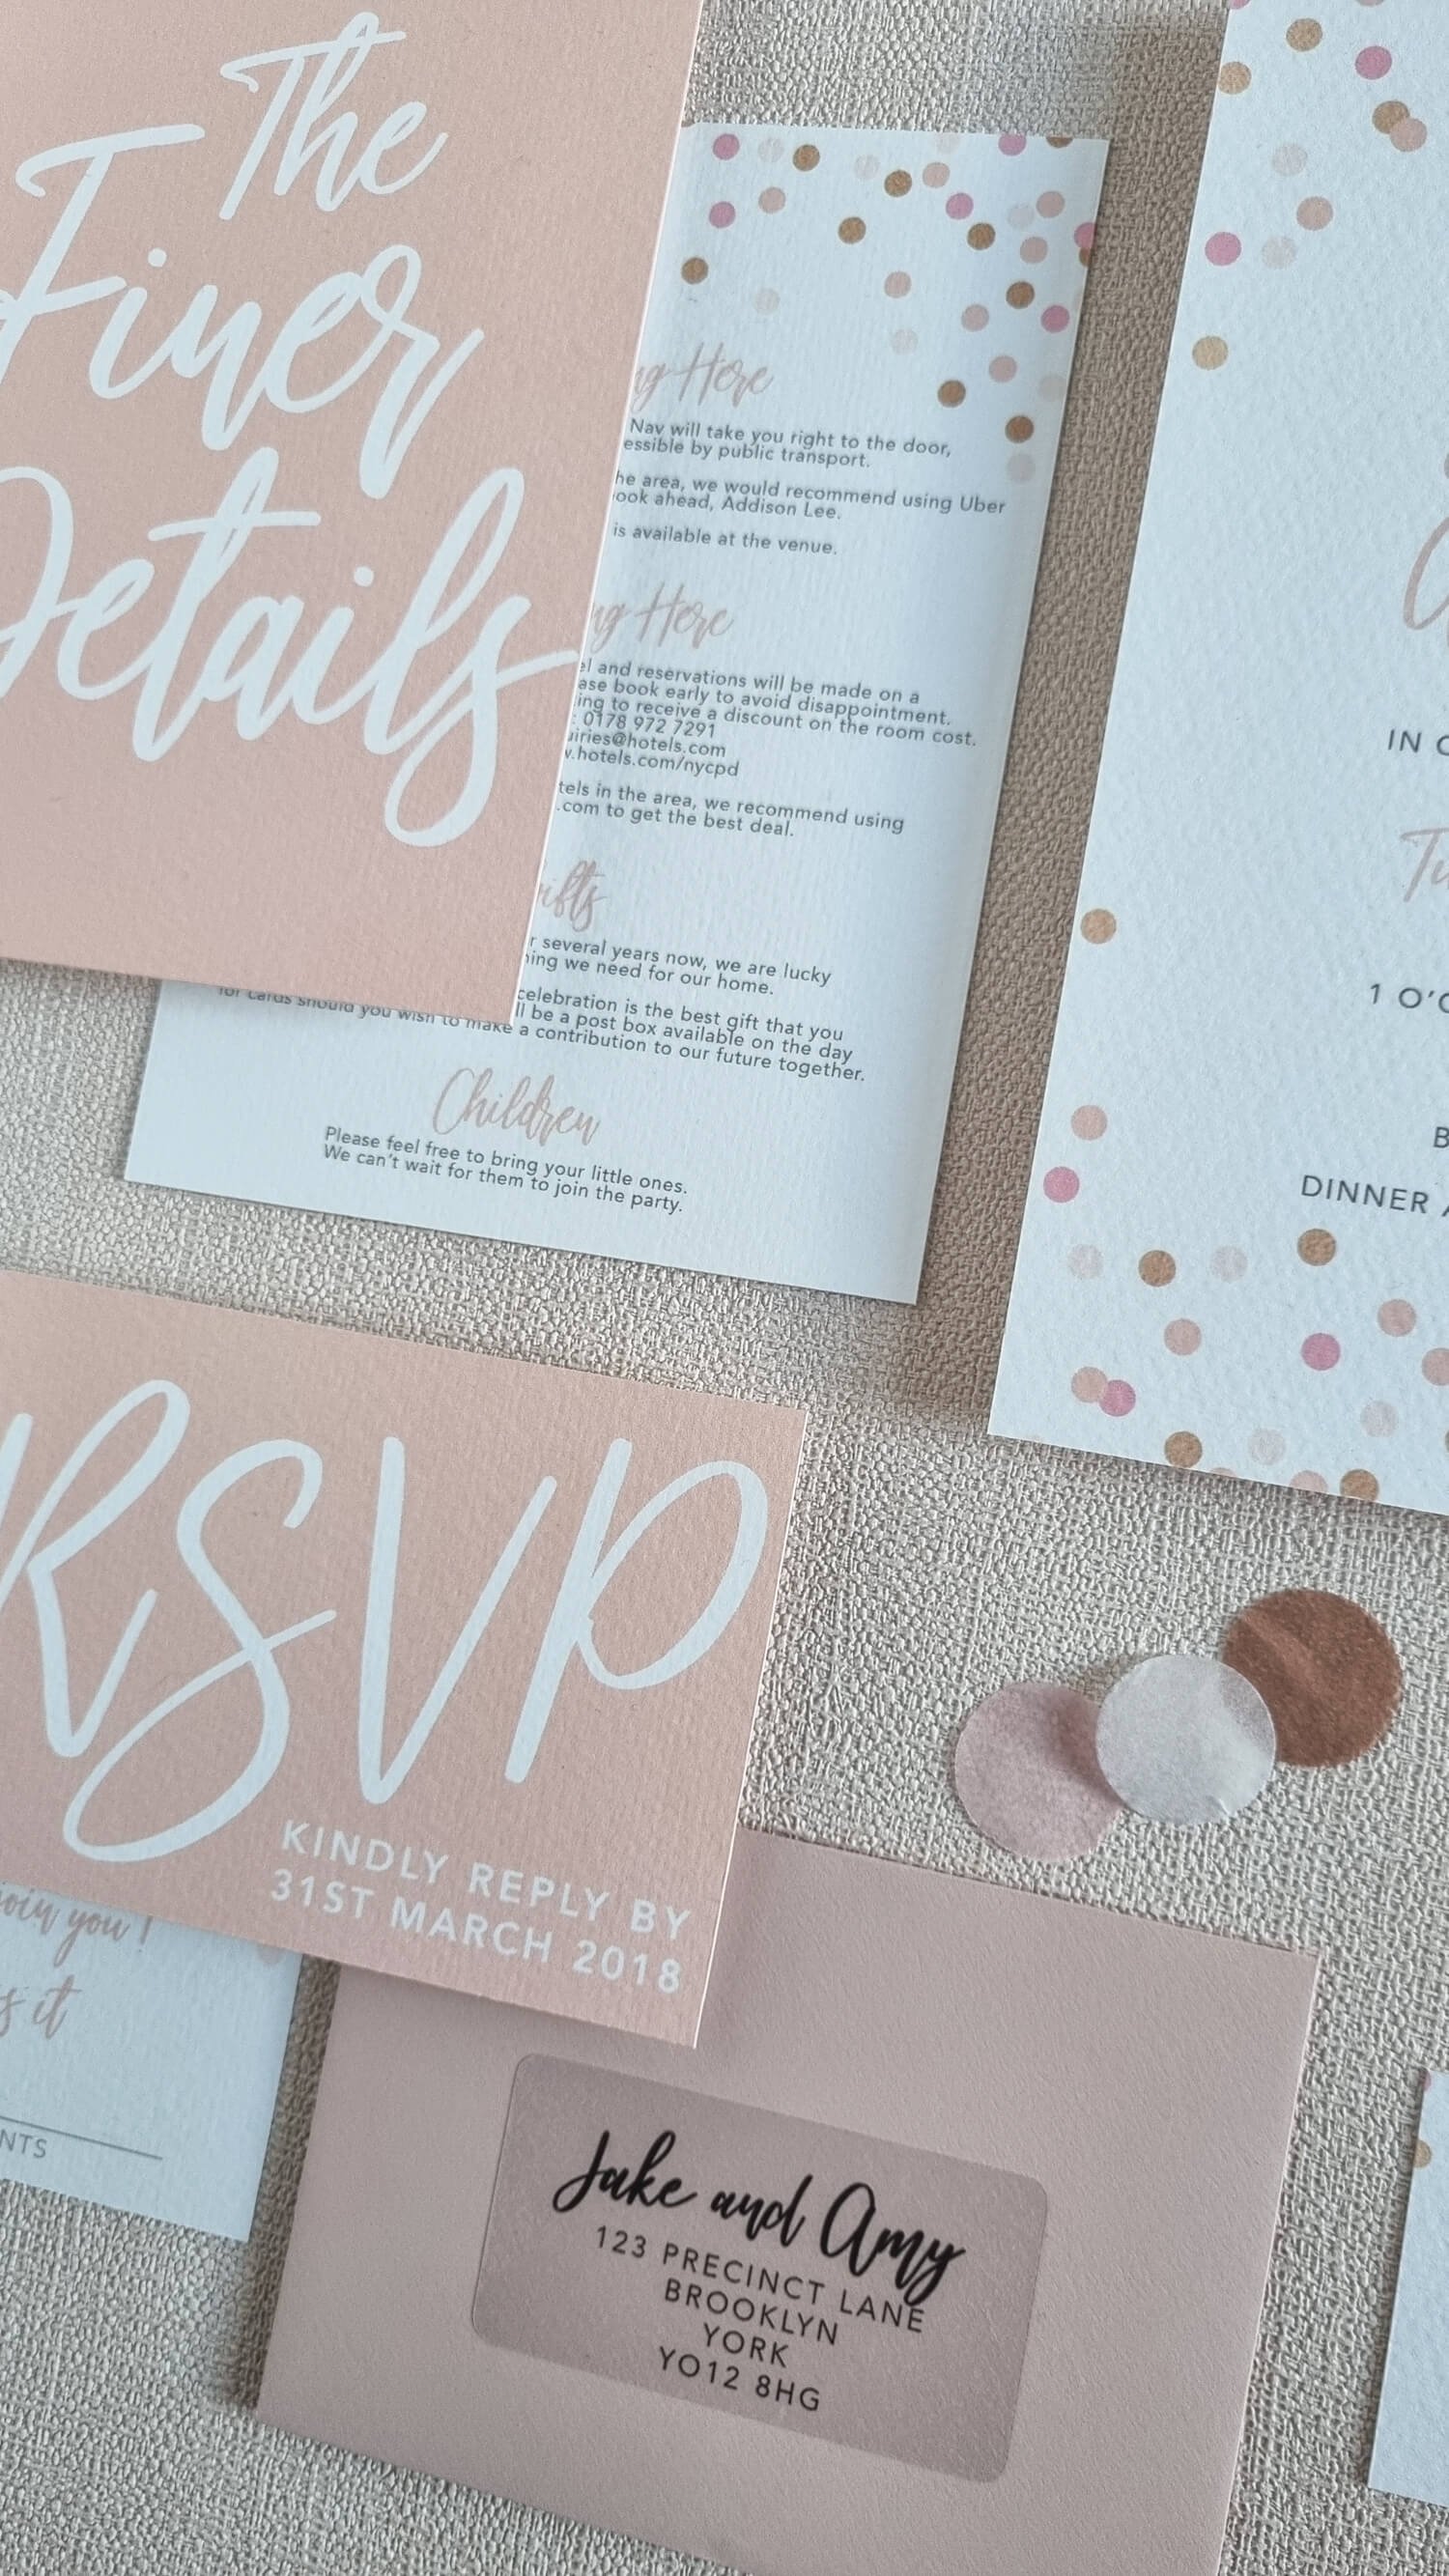 Blush Confetti Details and RSVP Cards with Addressed Envelope